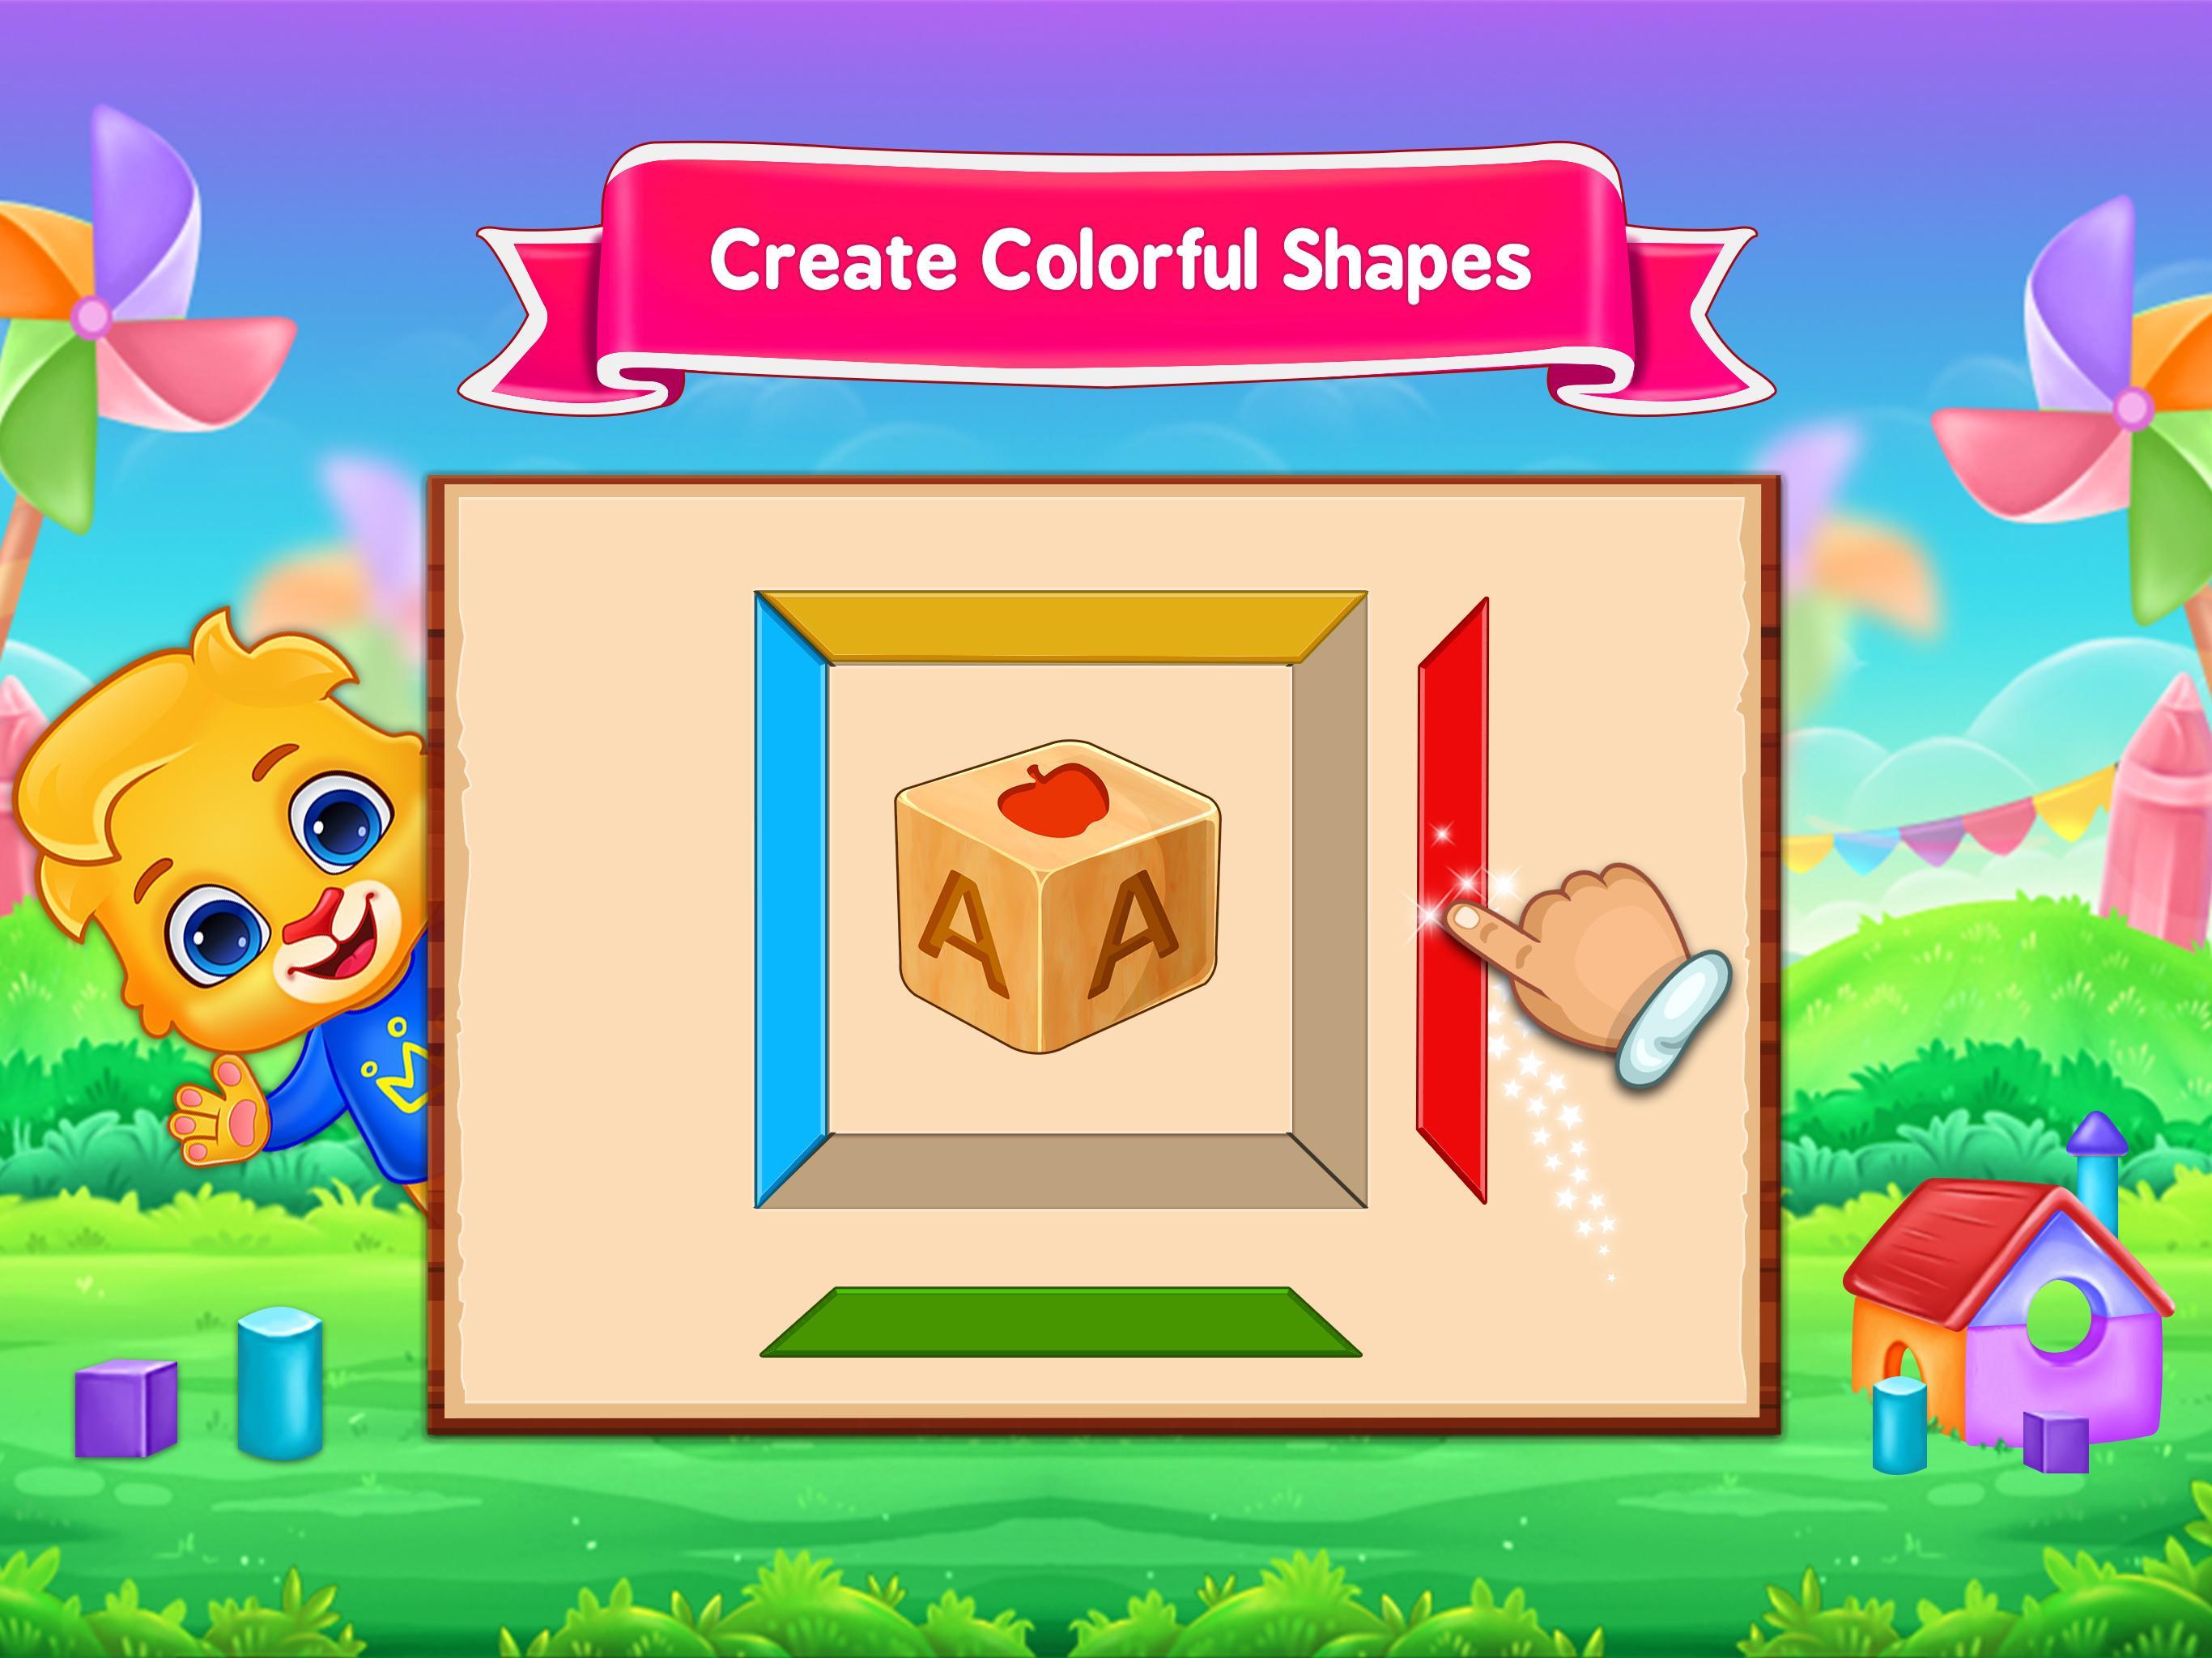 Colors & Shapes - Kids Learn Color and Shape 1.2.5 Screenshot 14